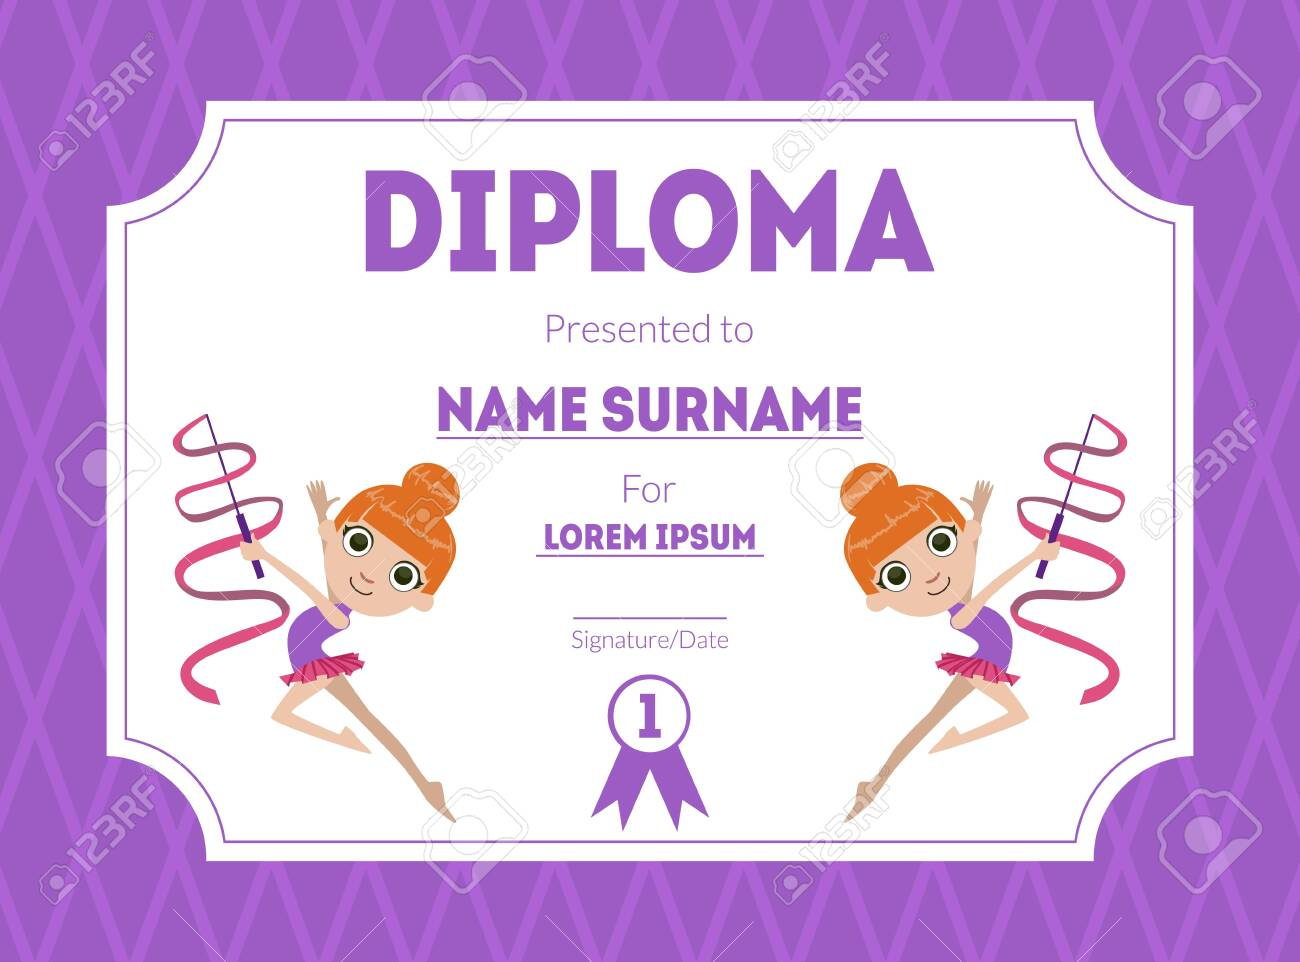 Sports Award Diploma Template, Kids Certificate With Gymnast.. Throughout Gymnastics Certificate Template